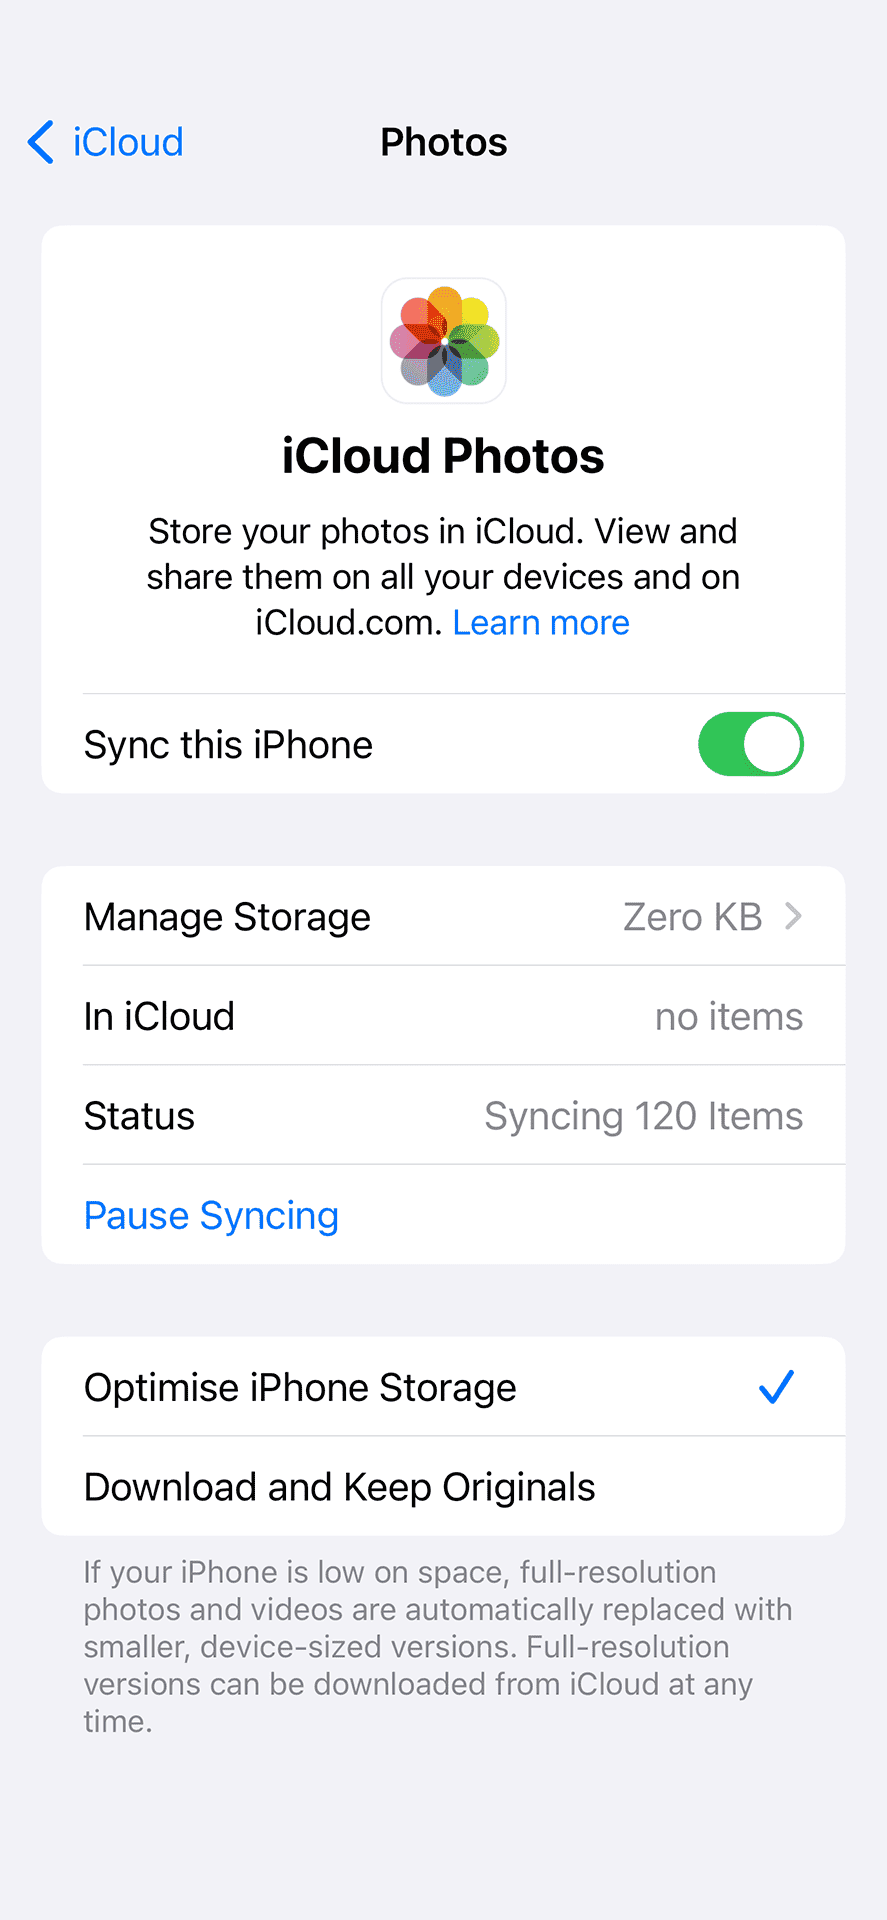 iCloud Photos with Sync turned on